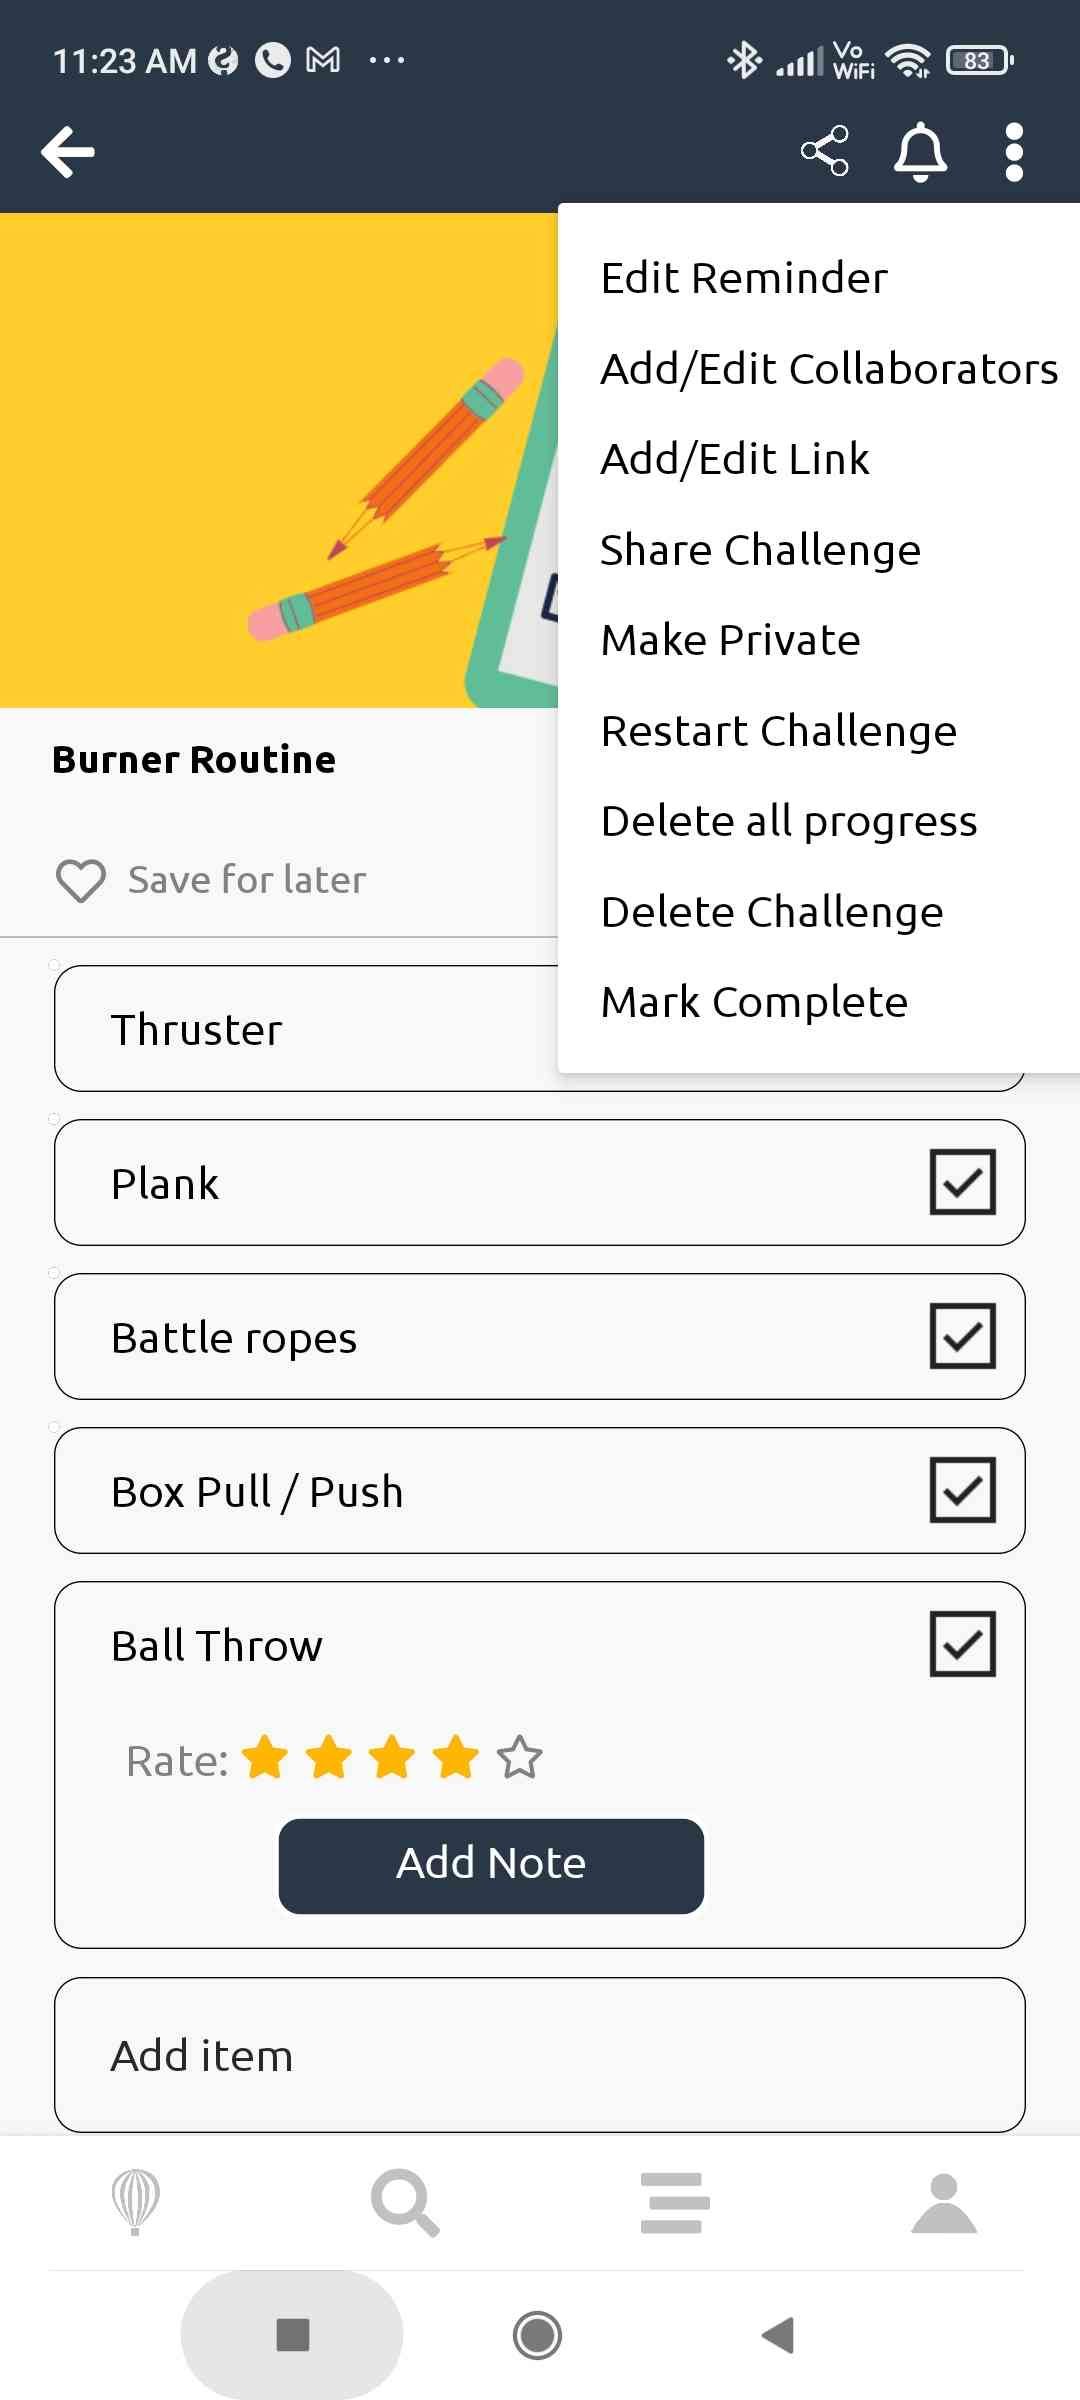 In a list-based challenge, you can write a list of objectives and tick them off as you do them